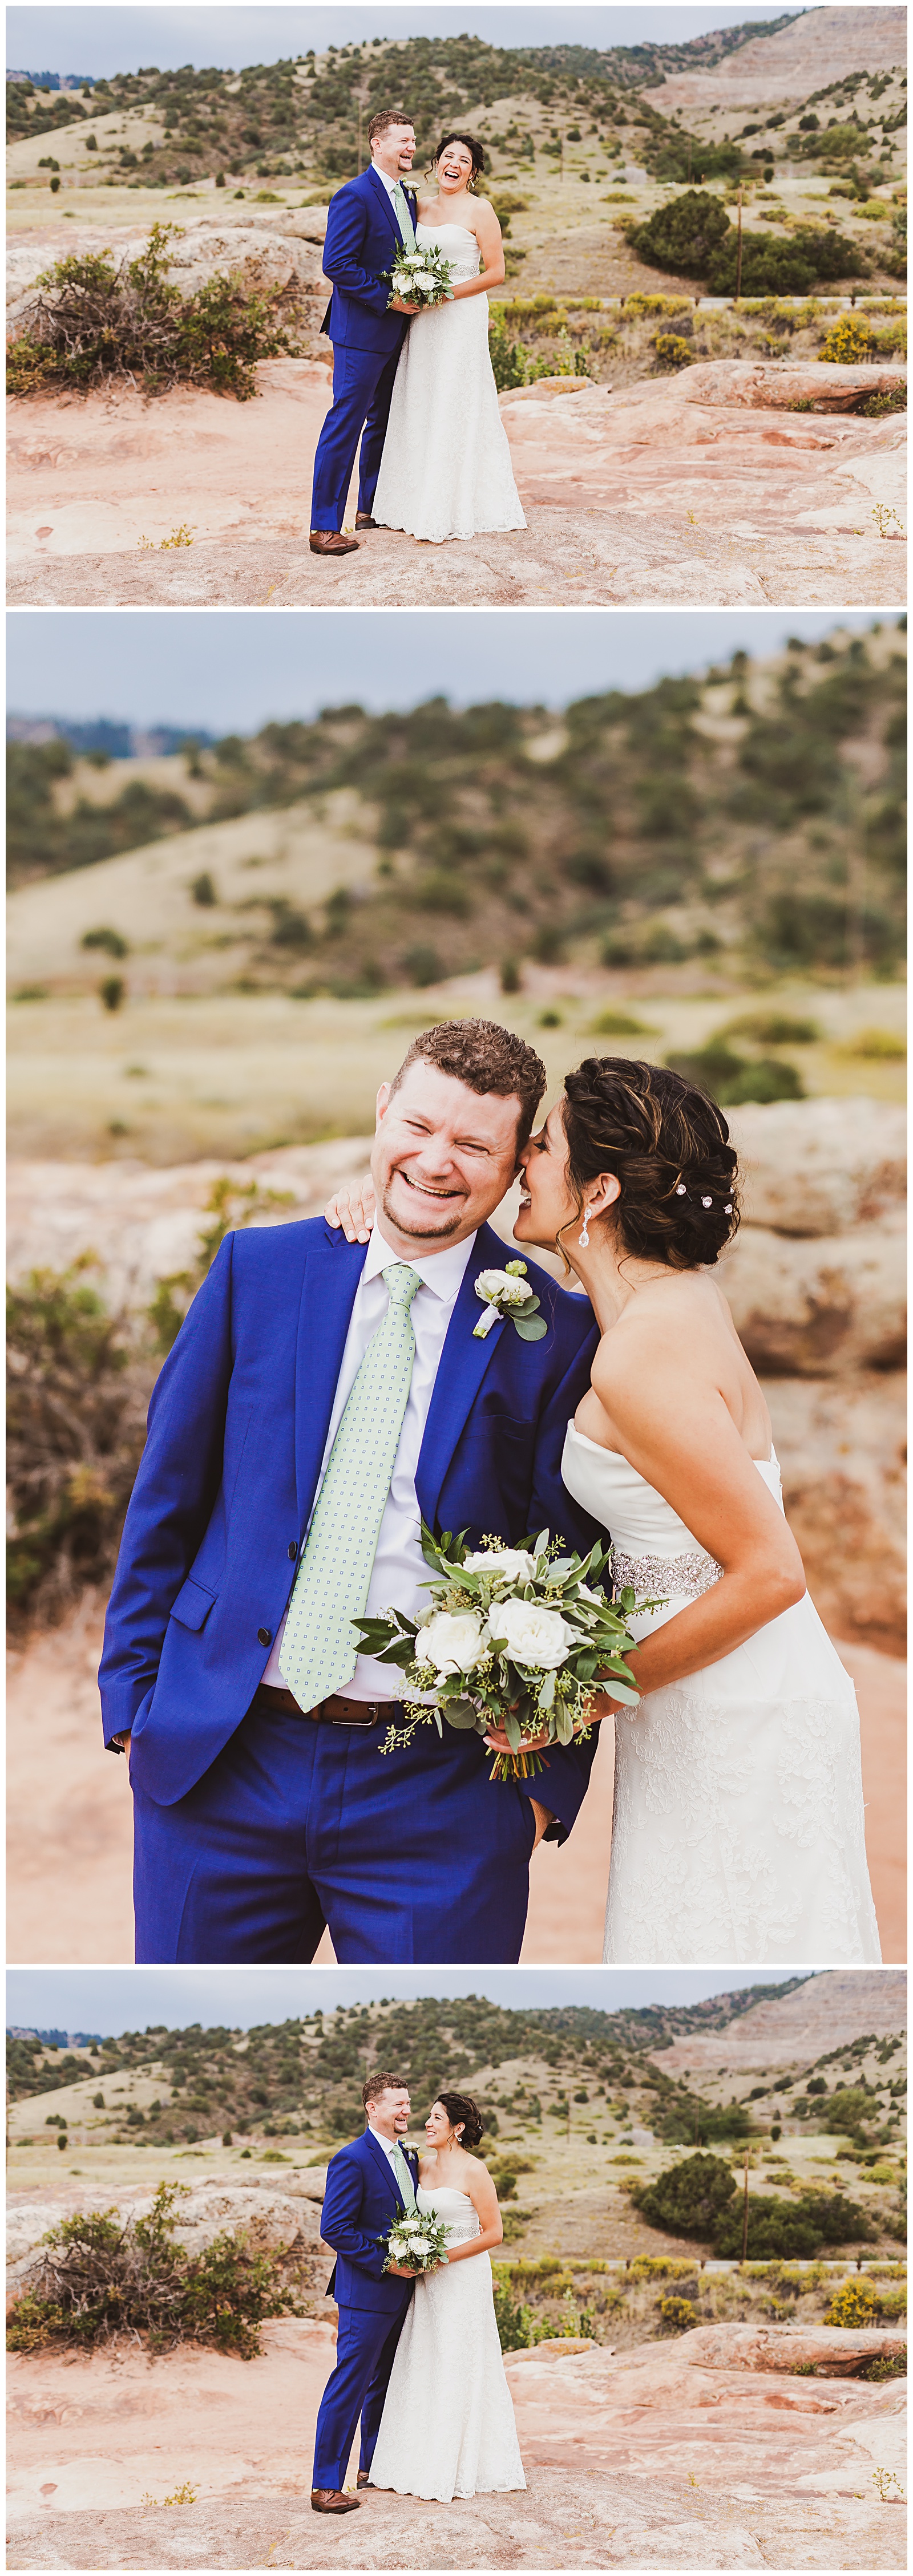 candid couple photos at willow ridge manor in morrison, co